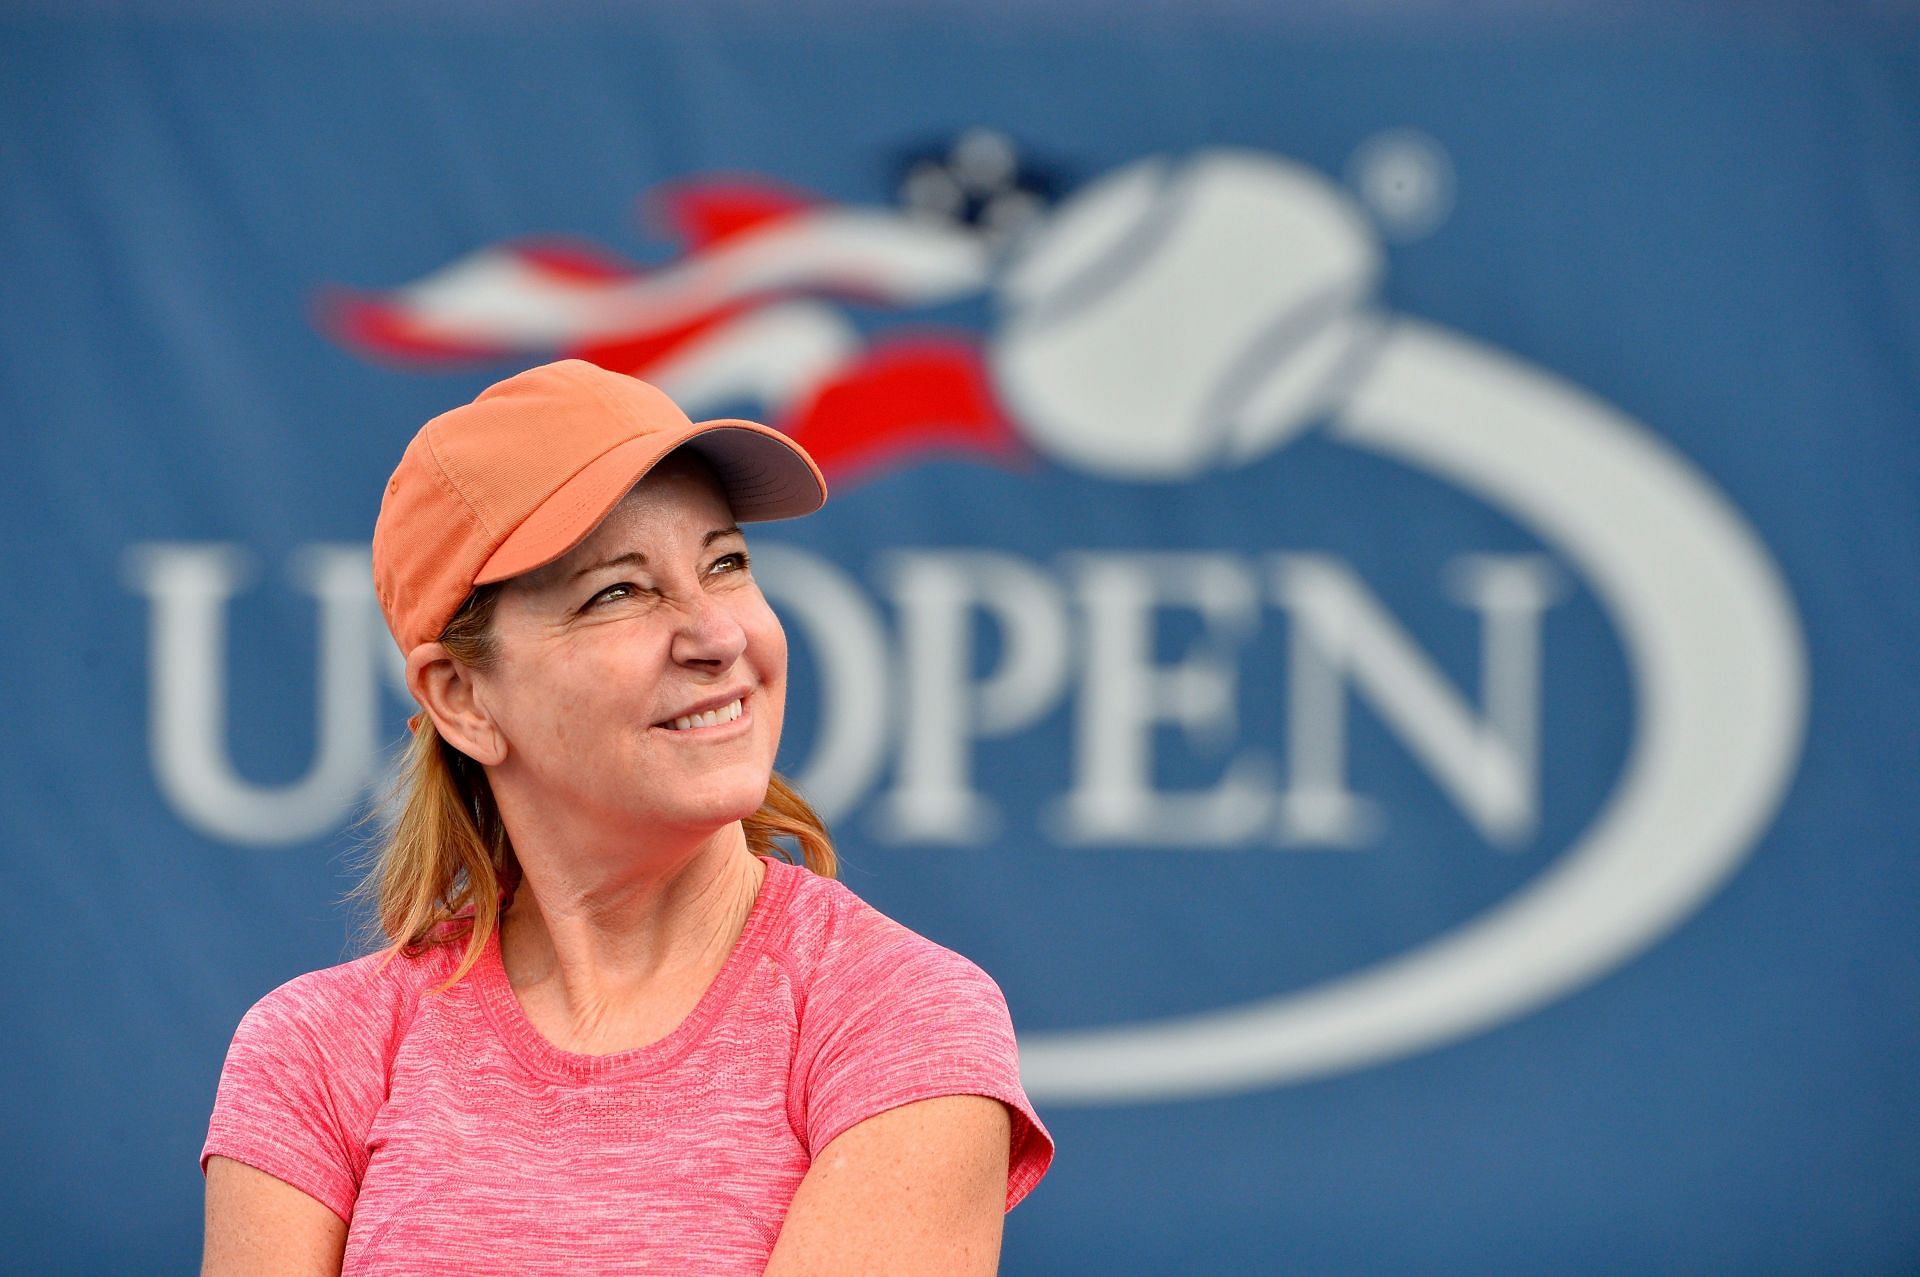 Chris Evert at the 2015 US Open